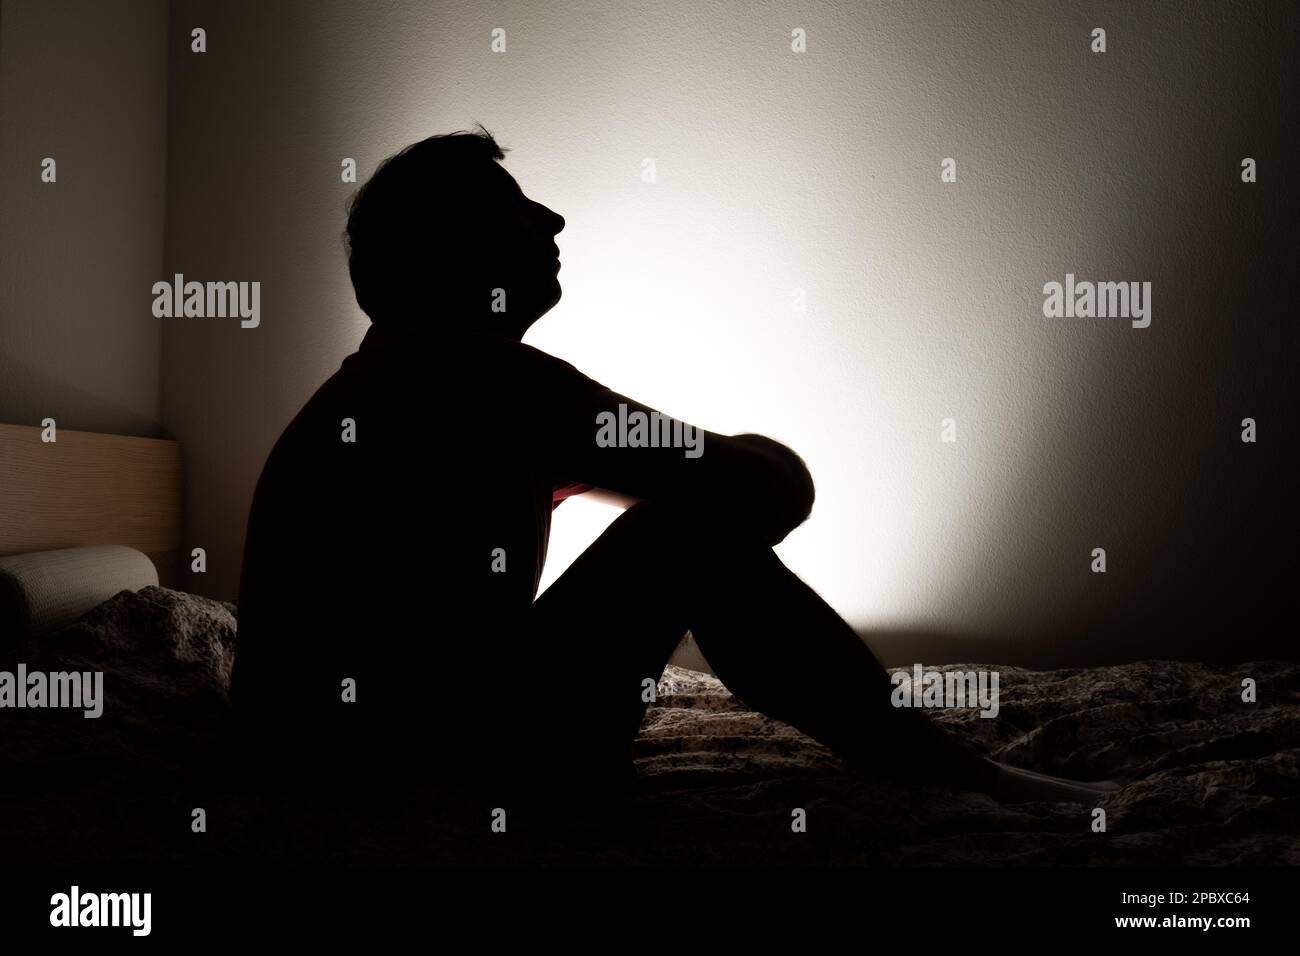 Male silhouette depicting loneliness or depression sitting in his apartment bed. Stock Photo